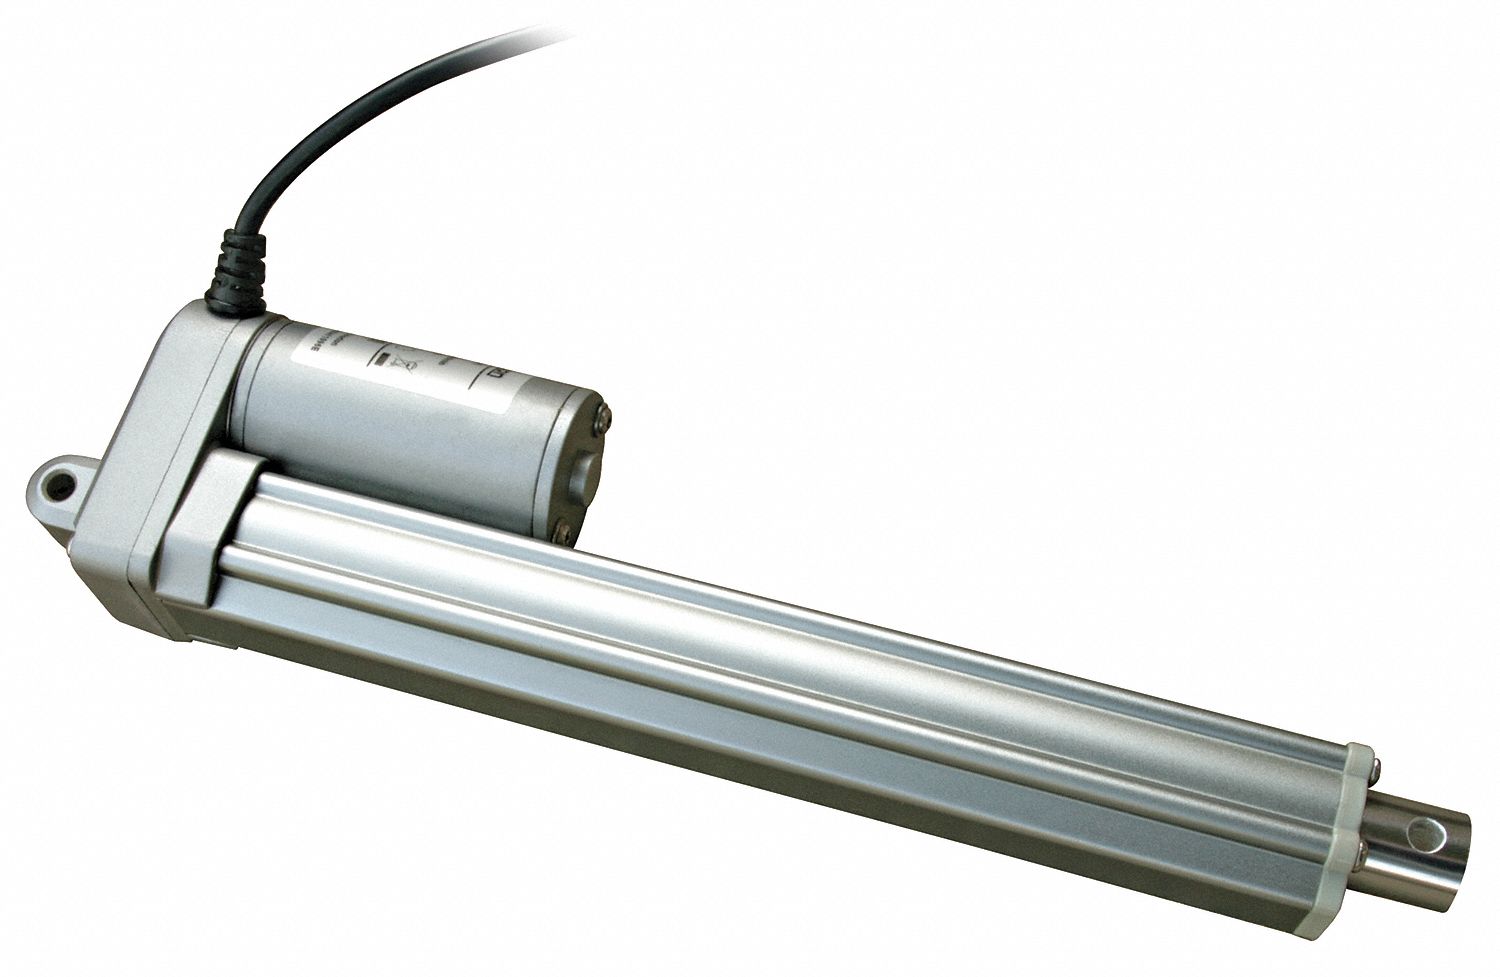 DUFF-NORTON Linear Actuator: 112 lb Rated Load, 2 in Stroke Lg, 30 in/min, 20% Duty Cycle, 24V DC - 5FTF3|LT100-2-50 - Grainger